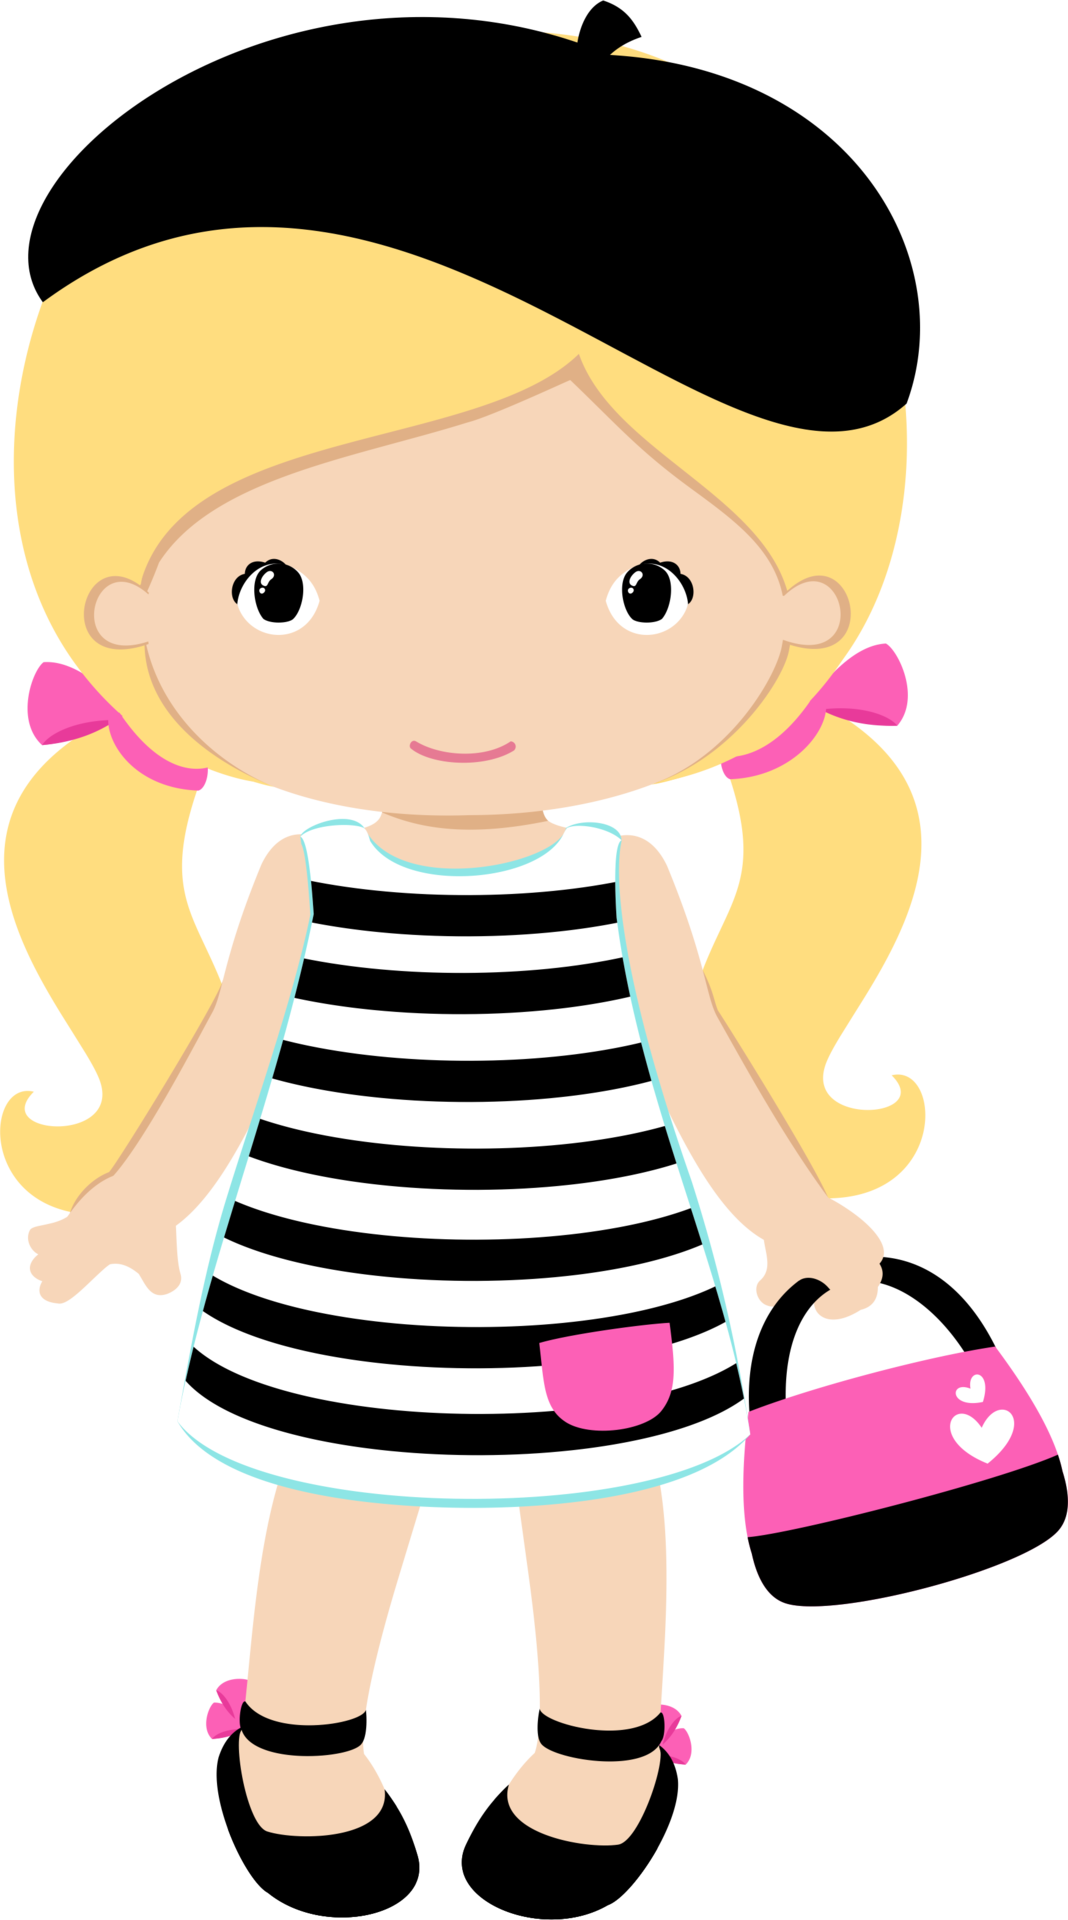  shared ver todas. Paint clipart lady painting